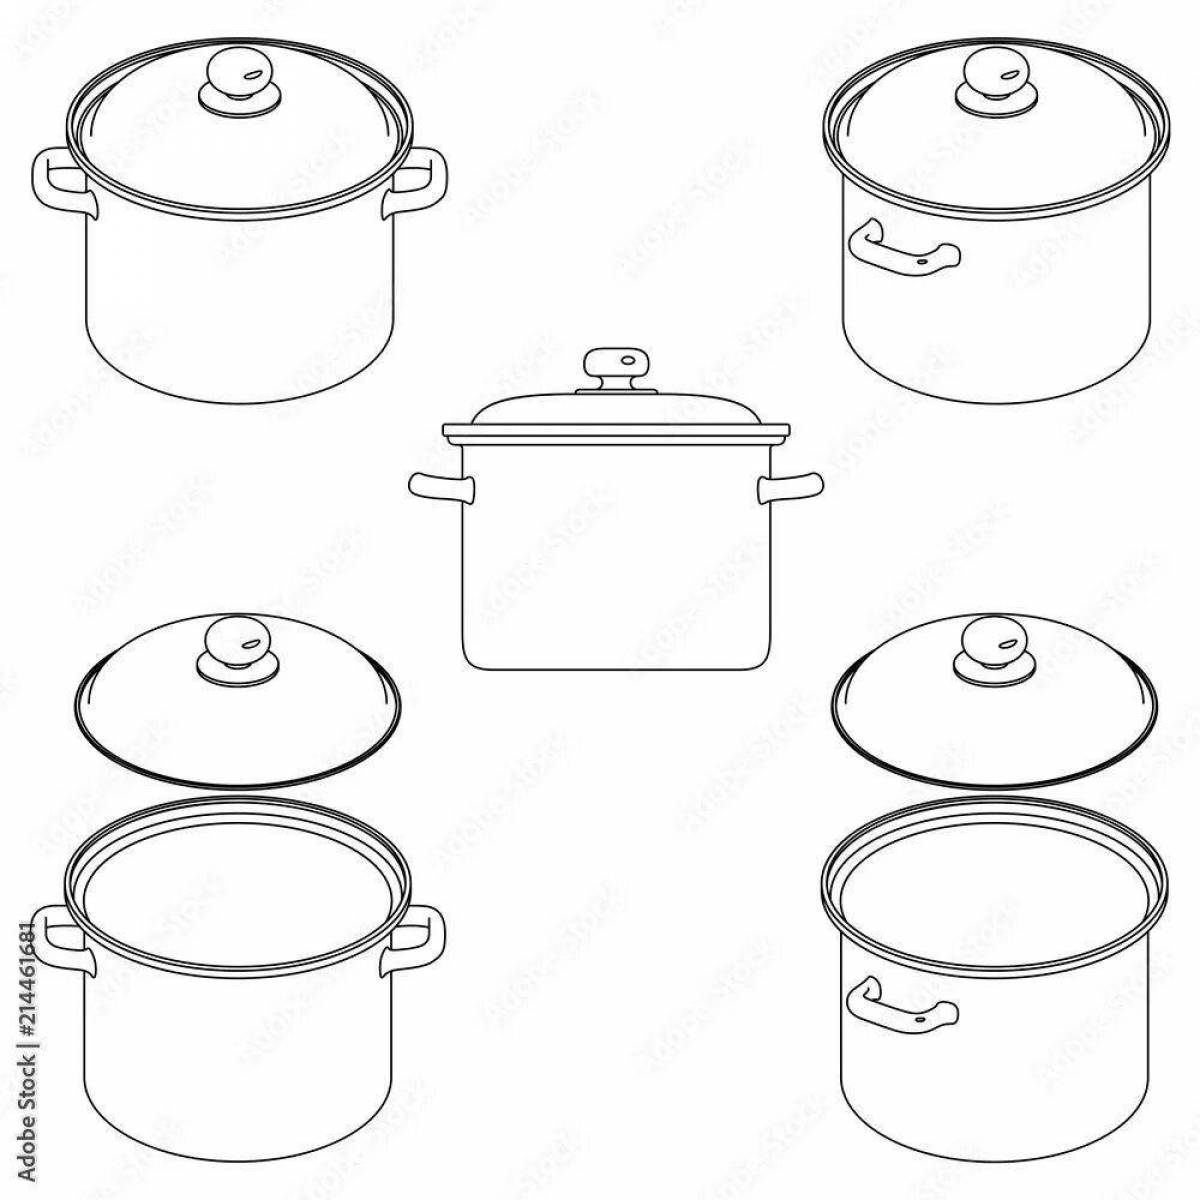 Creative pot coloring book for 3-4 year olds